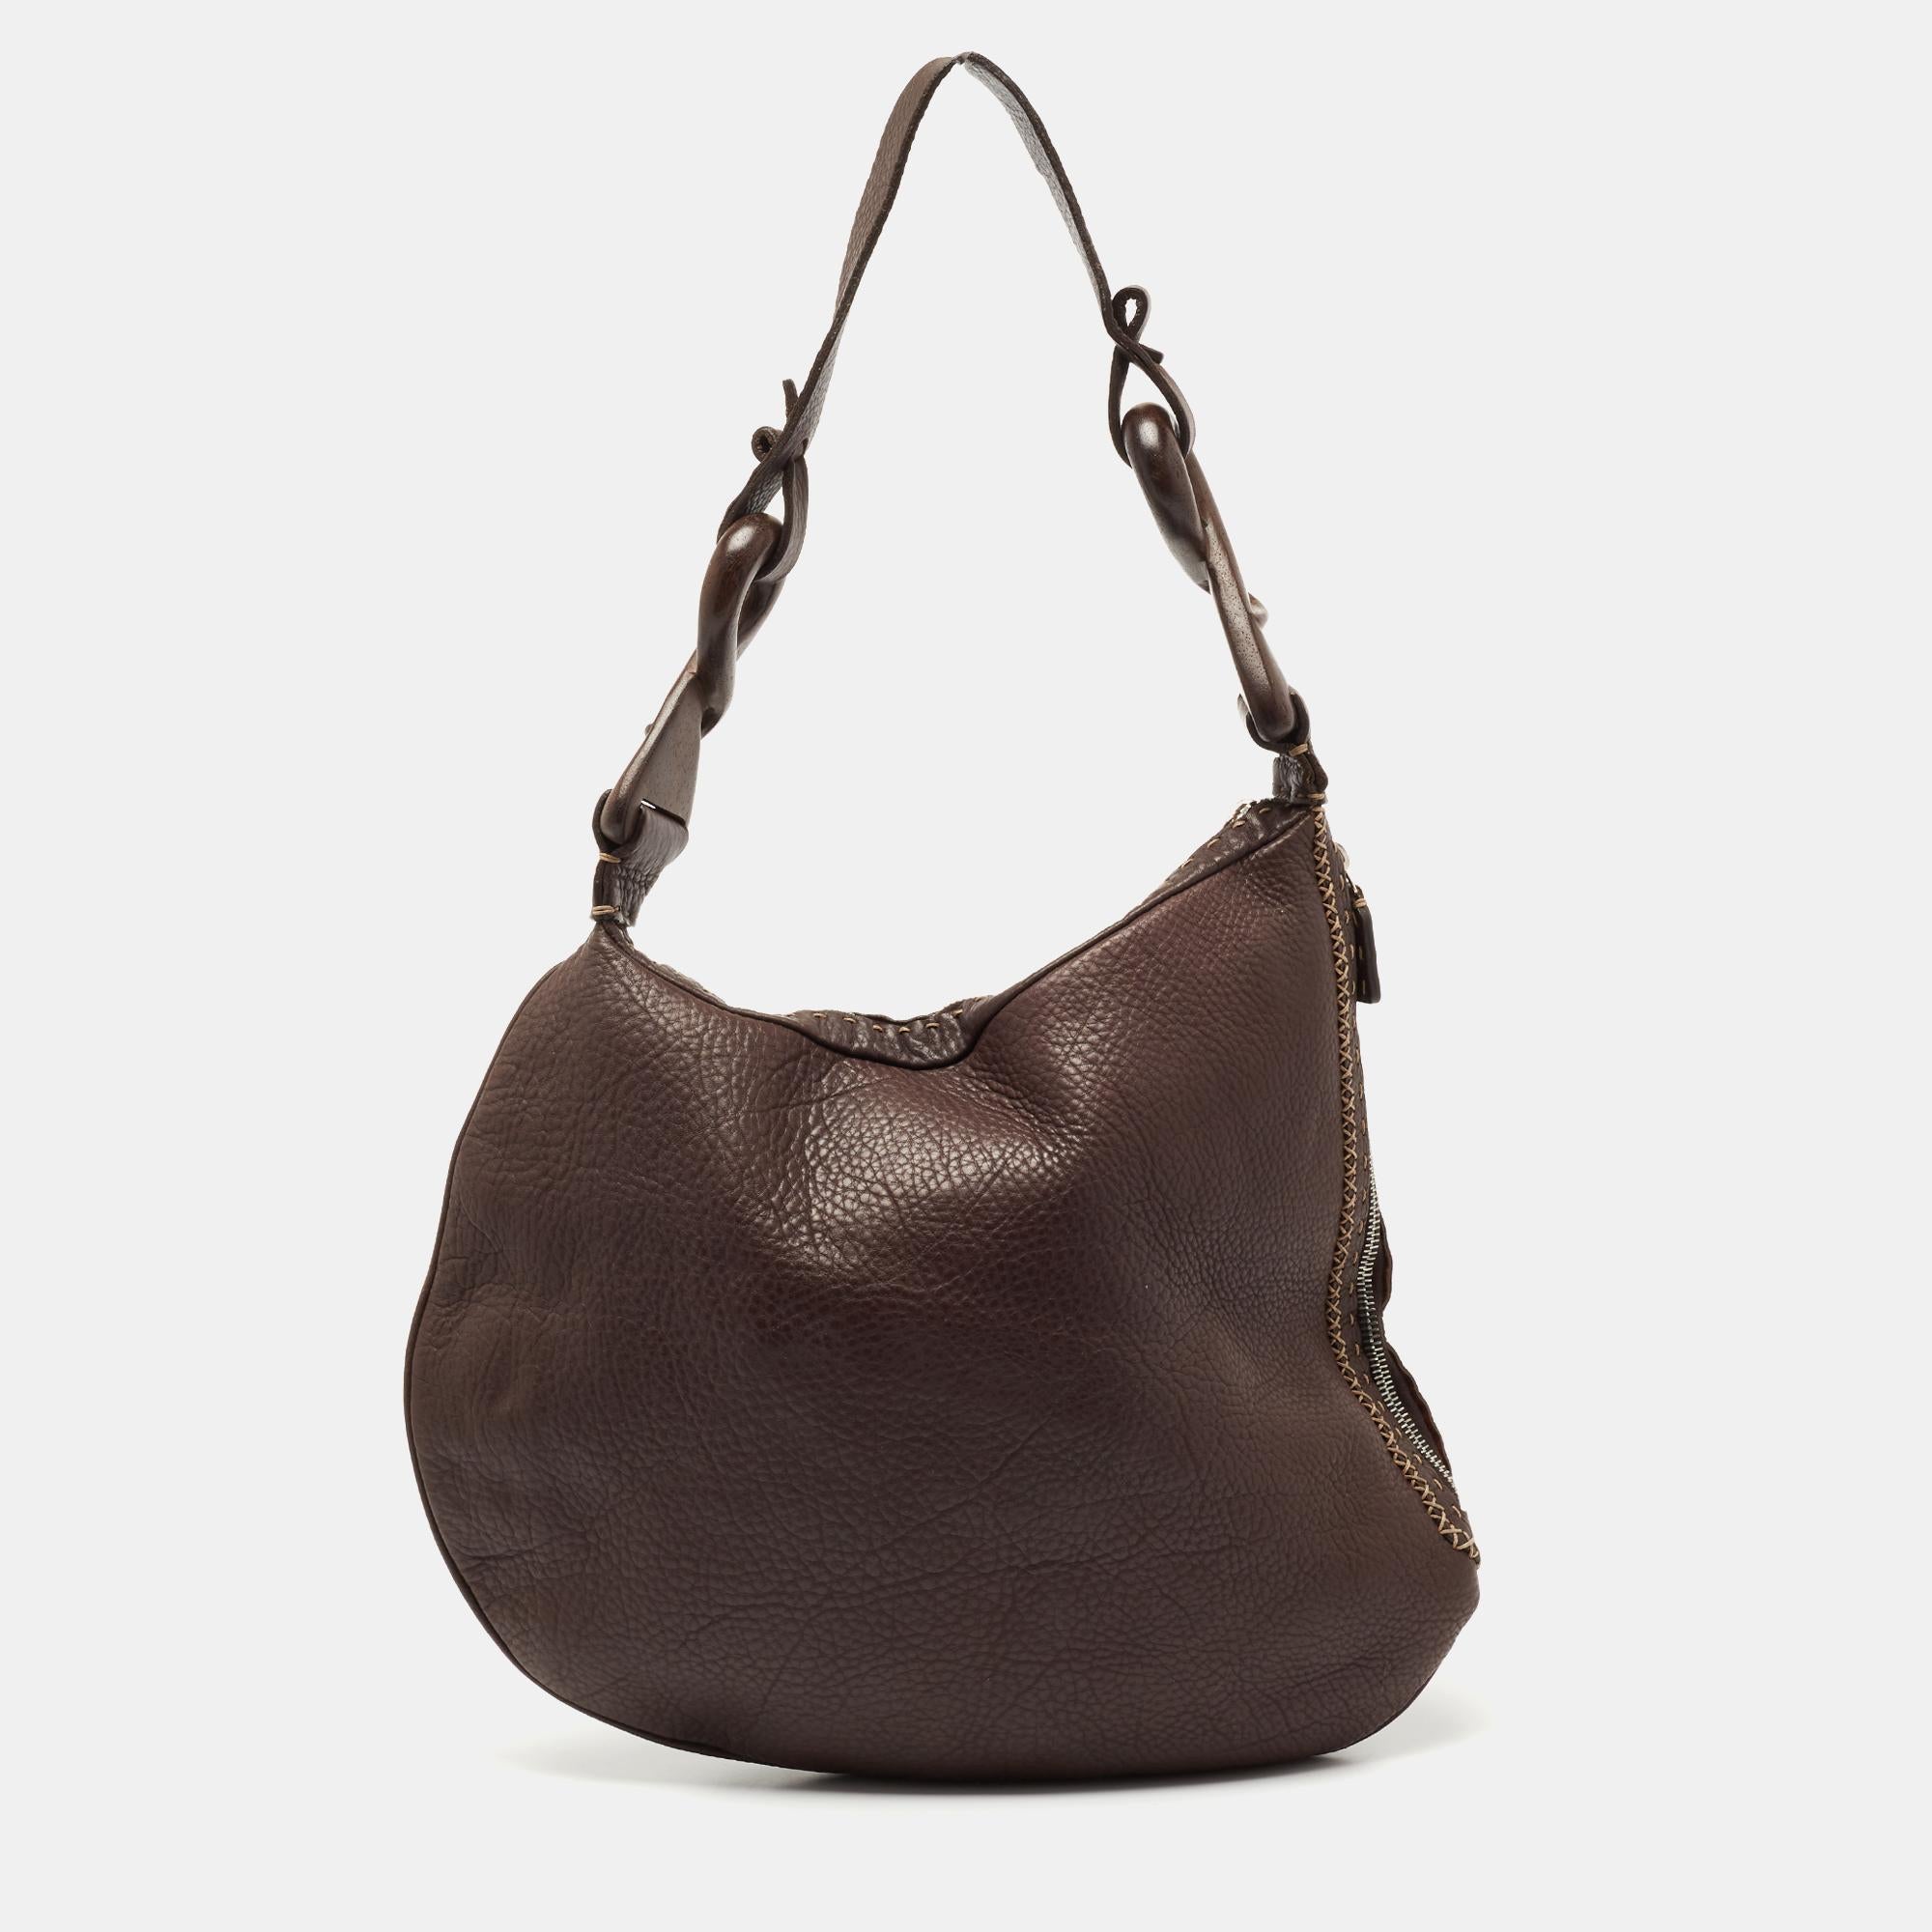 Designed for your convenience, this Fendi hobo is versatile and chic. Its brown leather exterior is decorated with an oyster web stitching detail, and it is held by a single handle at the top. Lined with suede, it is secured by a top and side zipper